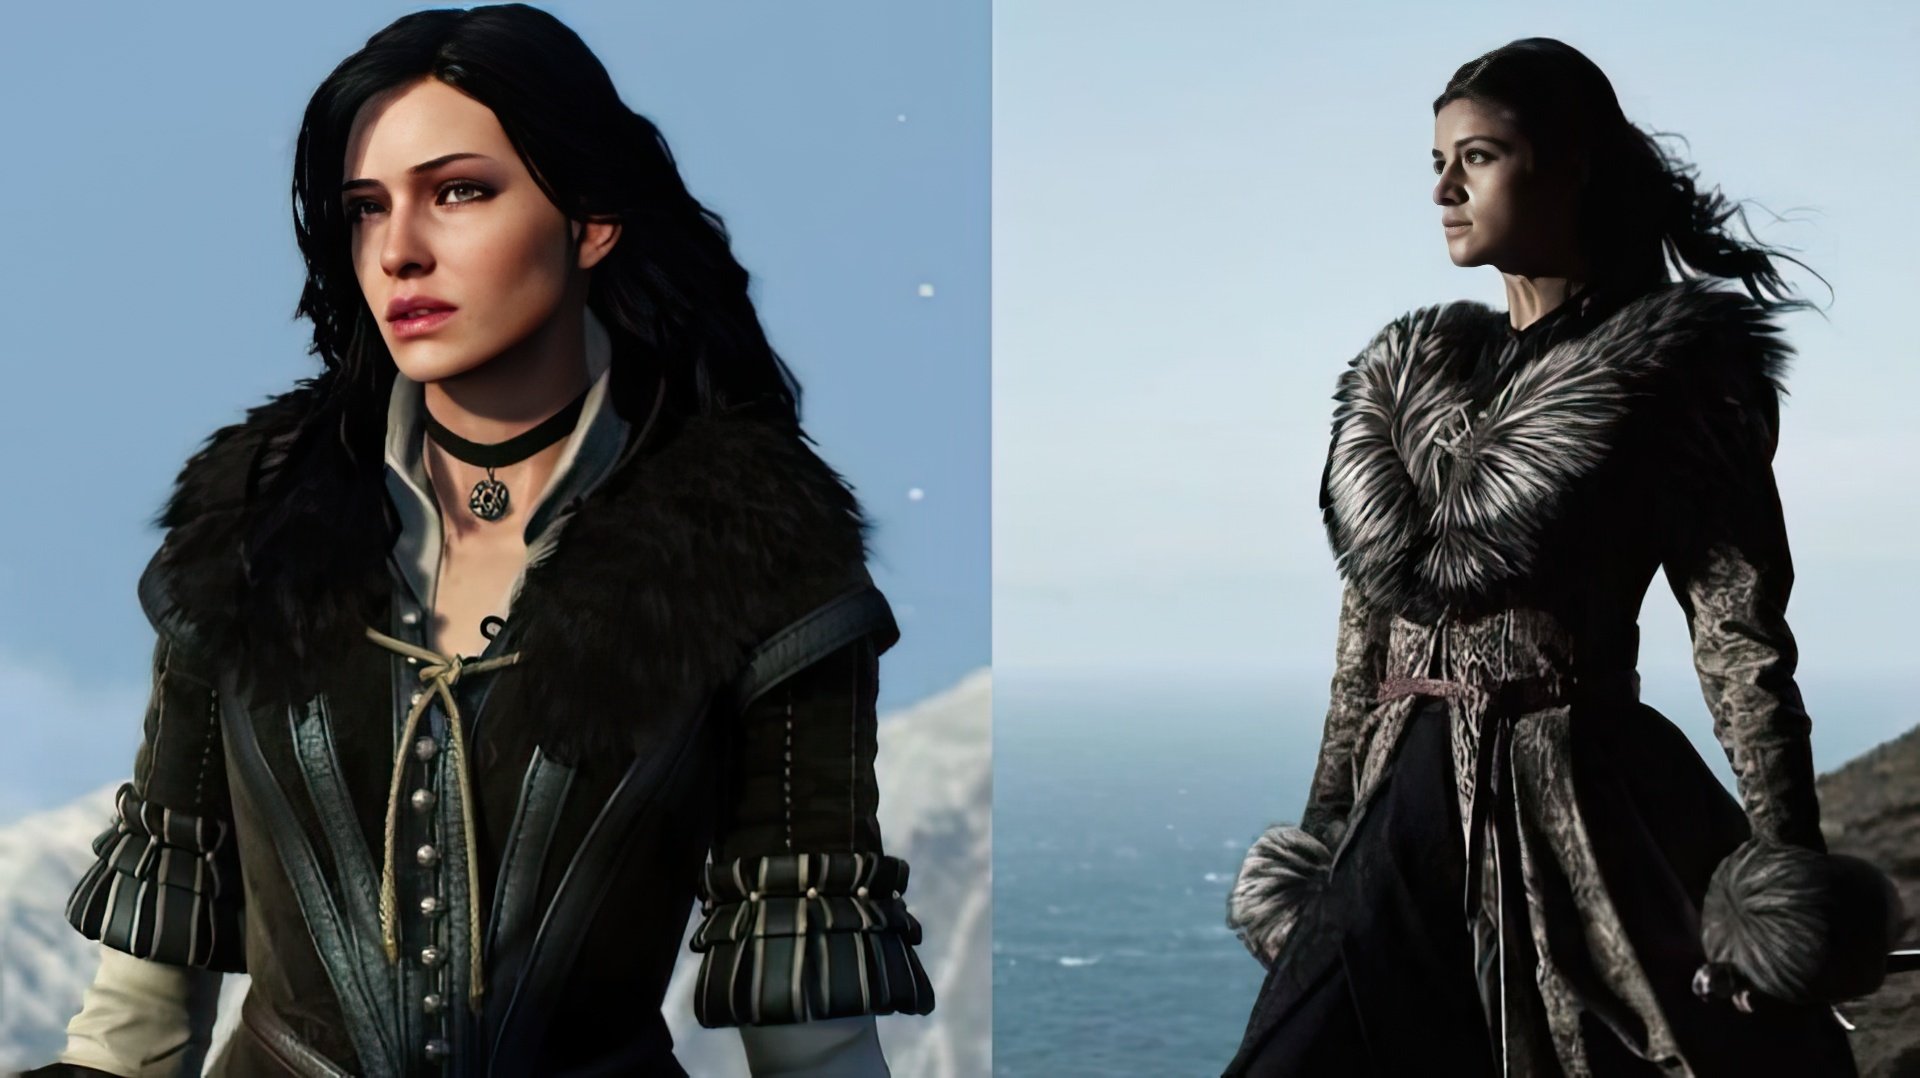 Yennefer of Vengerberg in the video game and Anya Chalotra as Yennefer